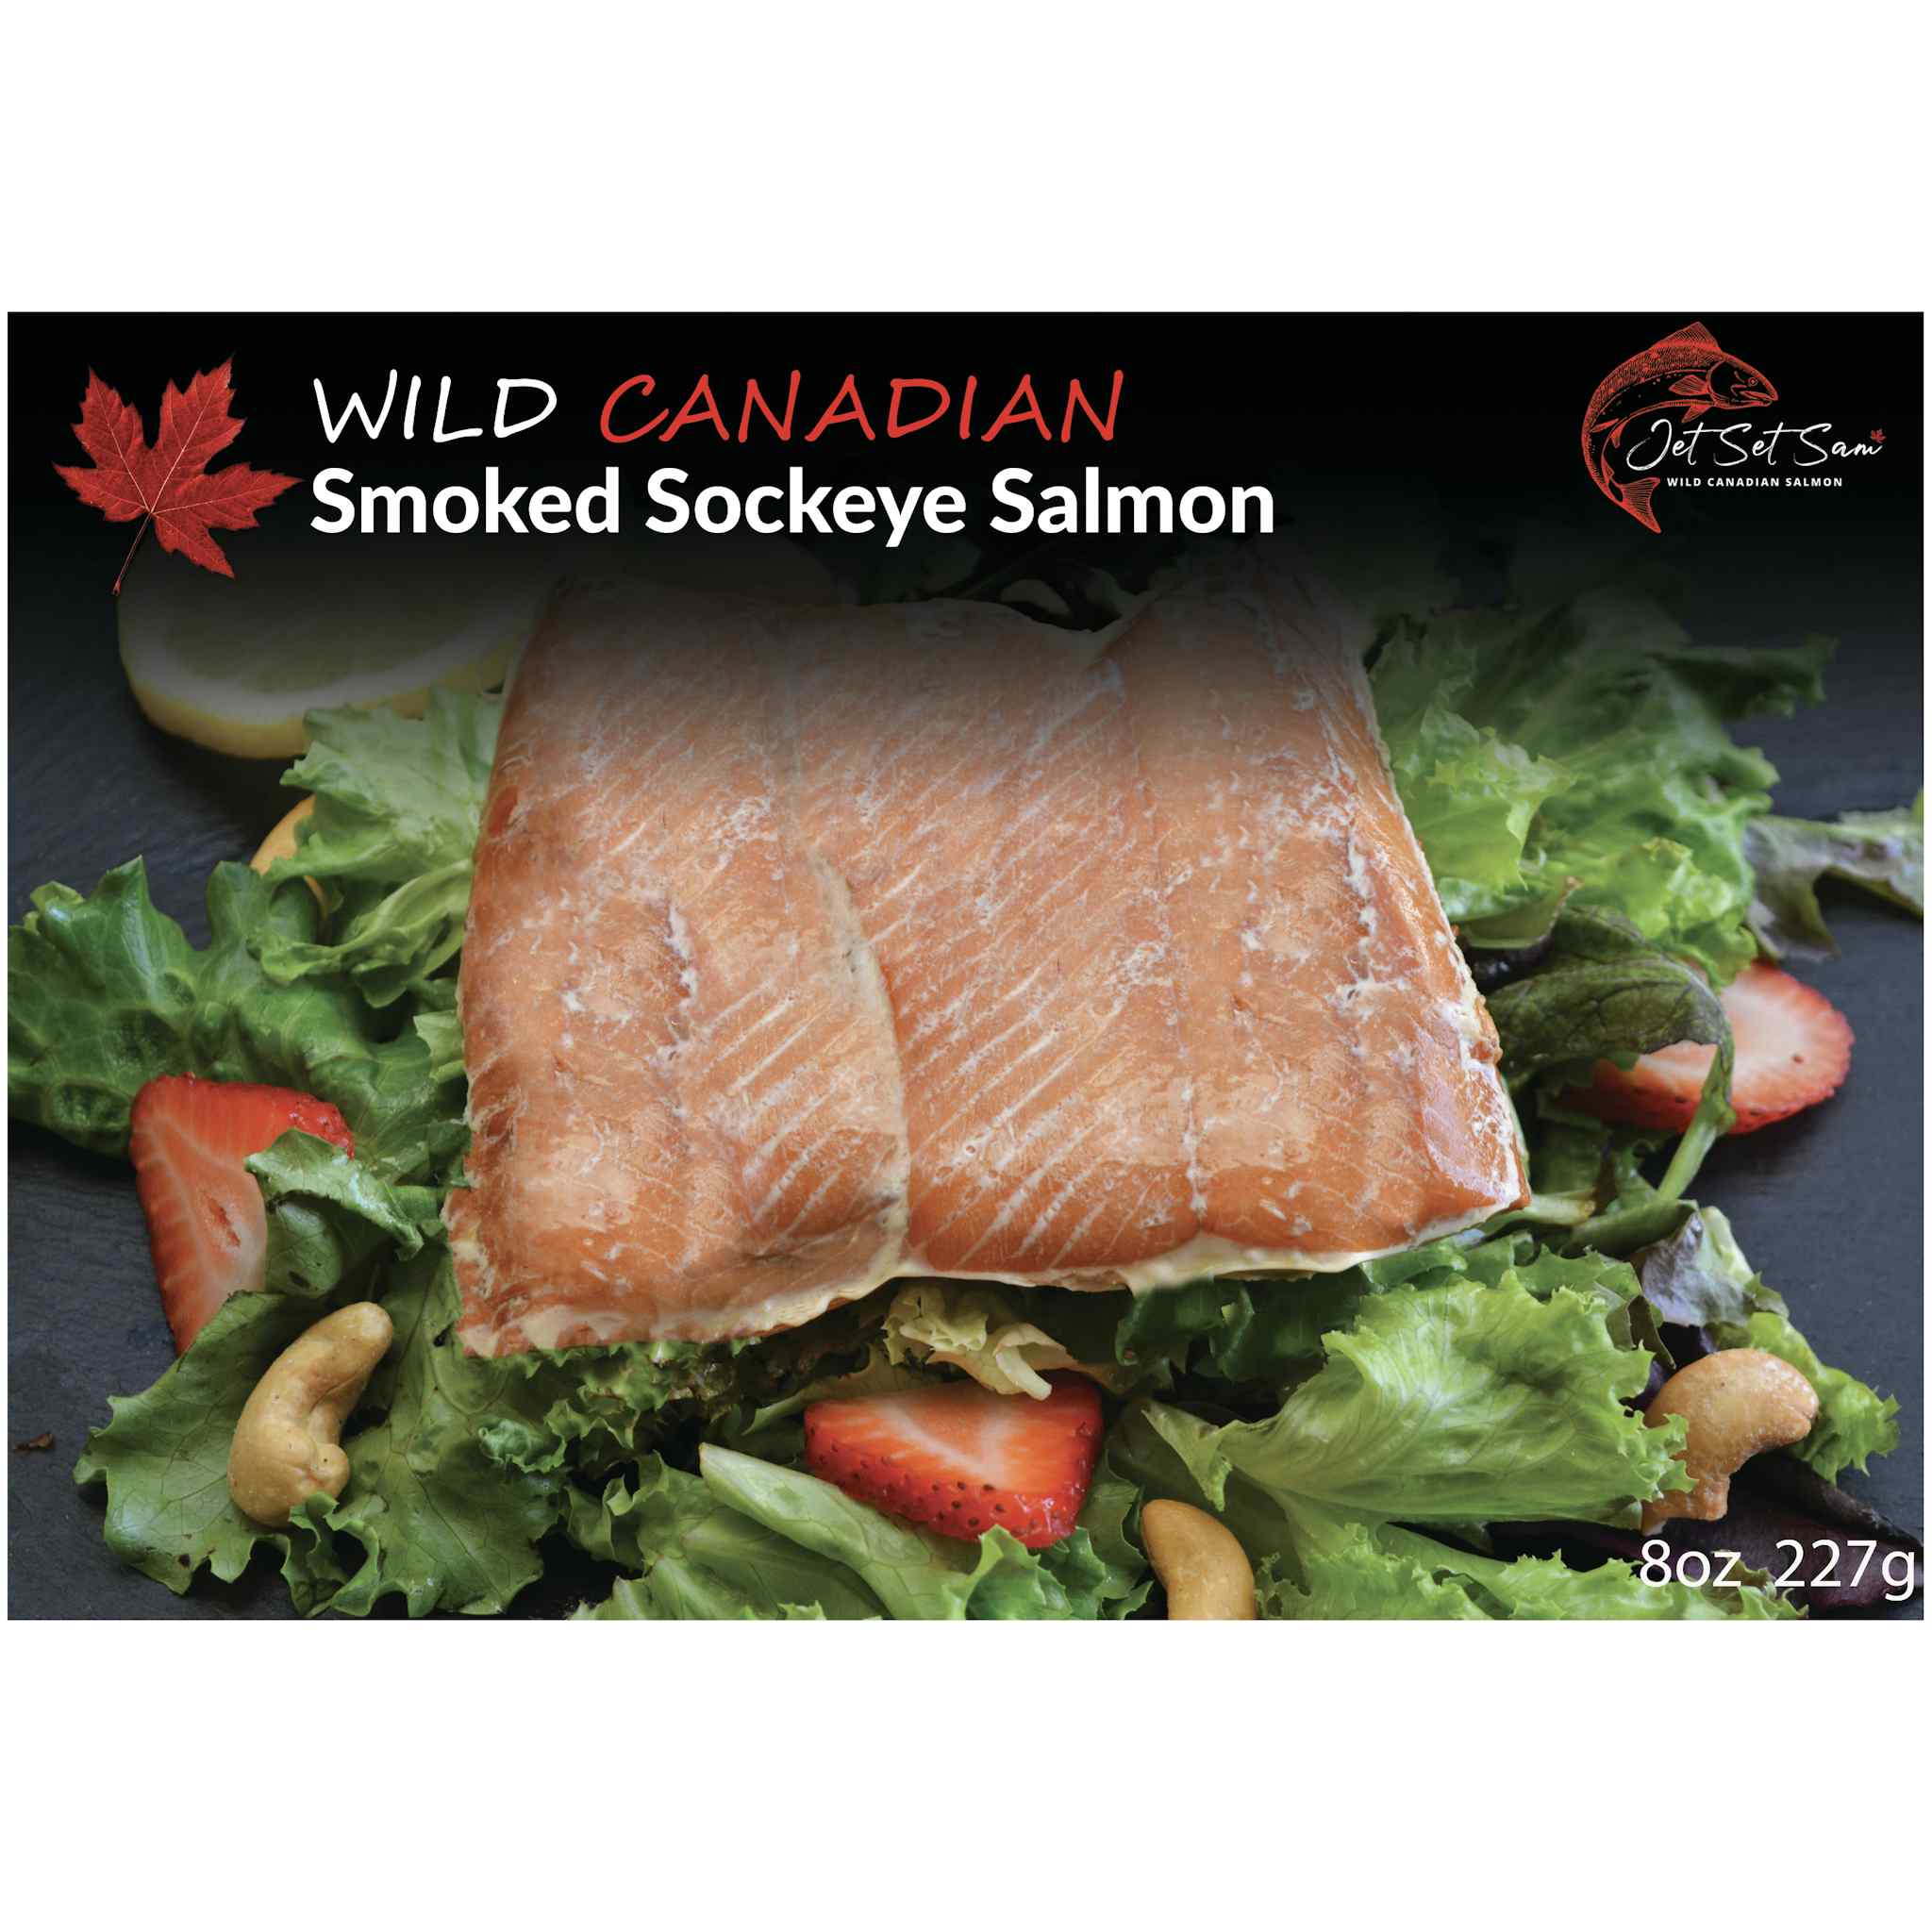 New Wild Caught Canadian Pacific Smoked Sockeye Salmon Filet Gift All Natural